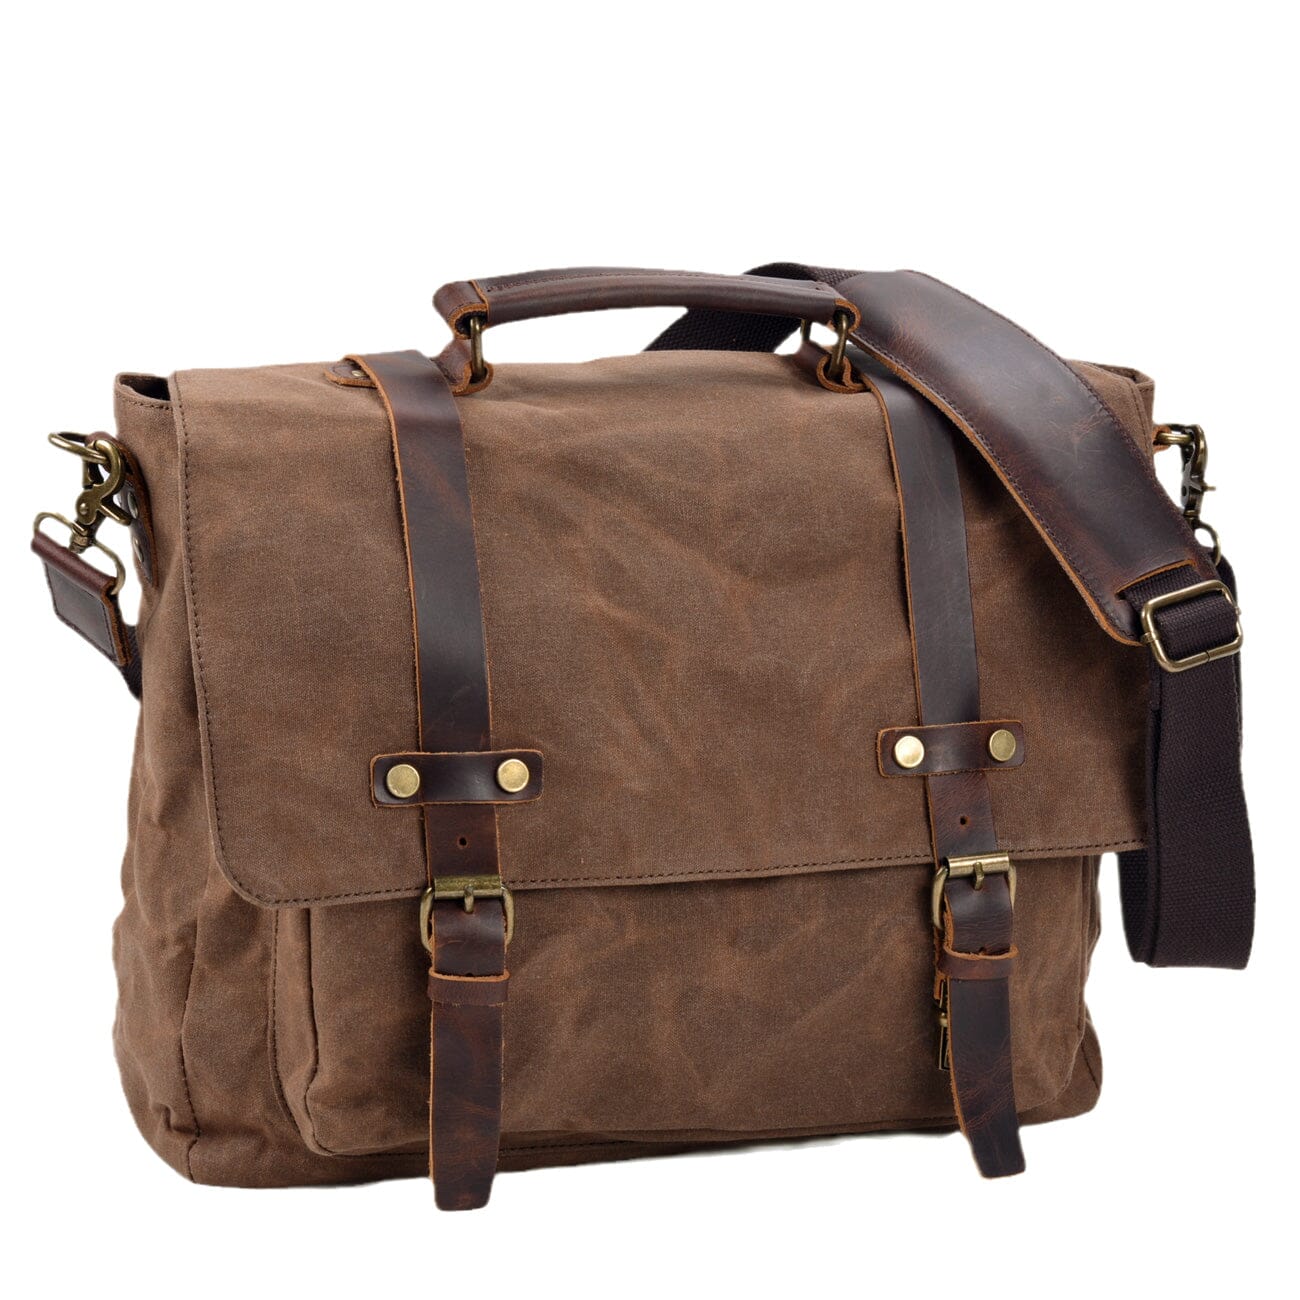 waxed canvas and leather messenger bag leather straps reinforced rivet top handle